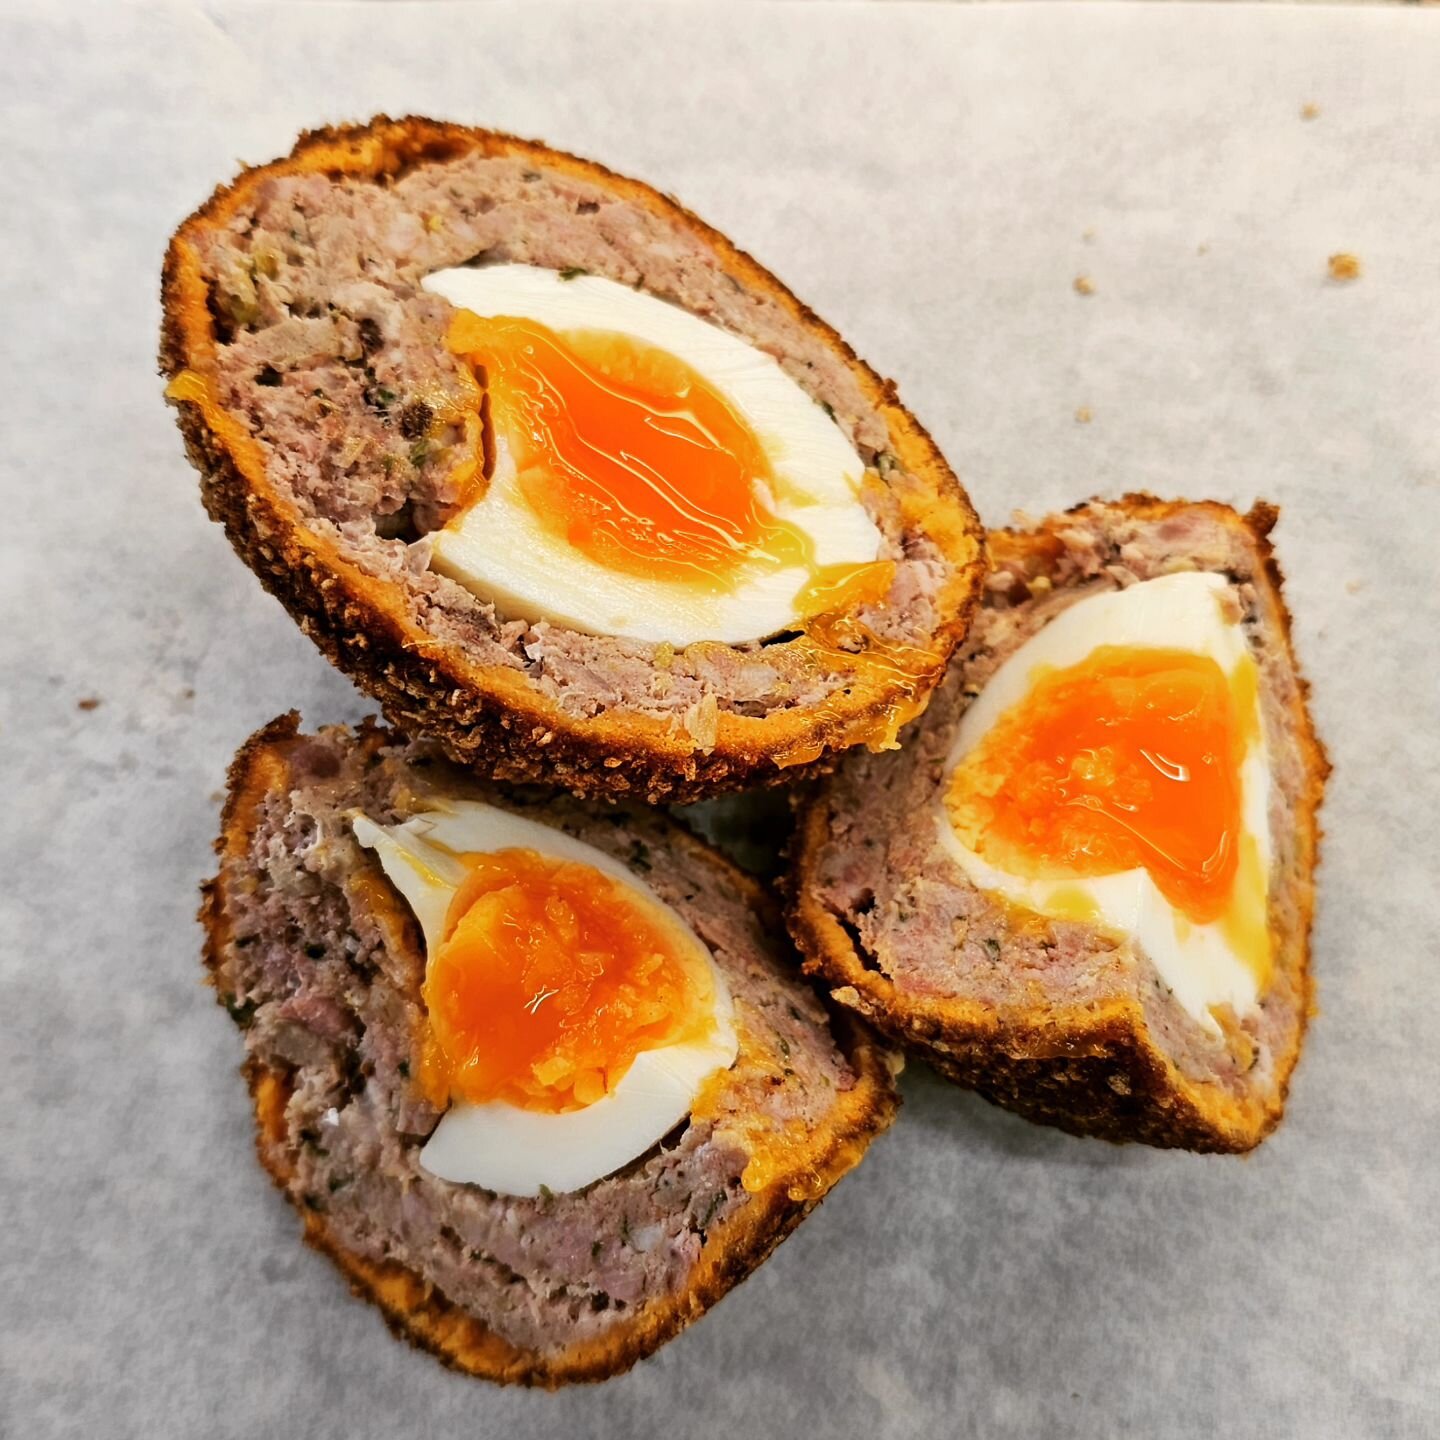 This weeks batch of Scotch Eggs has turned out outrageously good!

#sydenham #sydenhammums #dulwichmums #crystalpalacemums #nightin #butchers #freerange #fish #fishmongers #shopindependent #shopsmallbusiness #foodieofinstagram #food #london #londonea